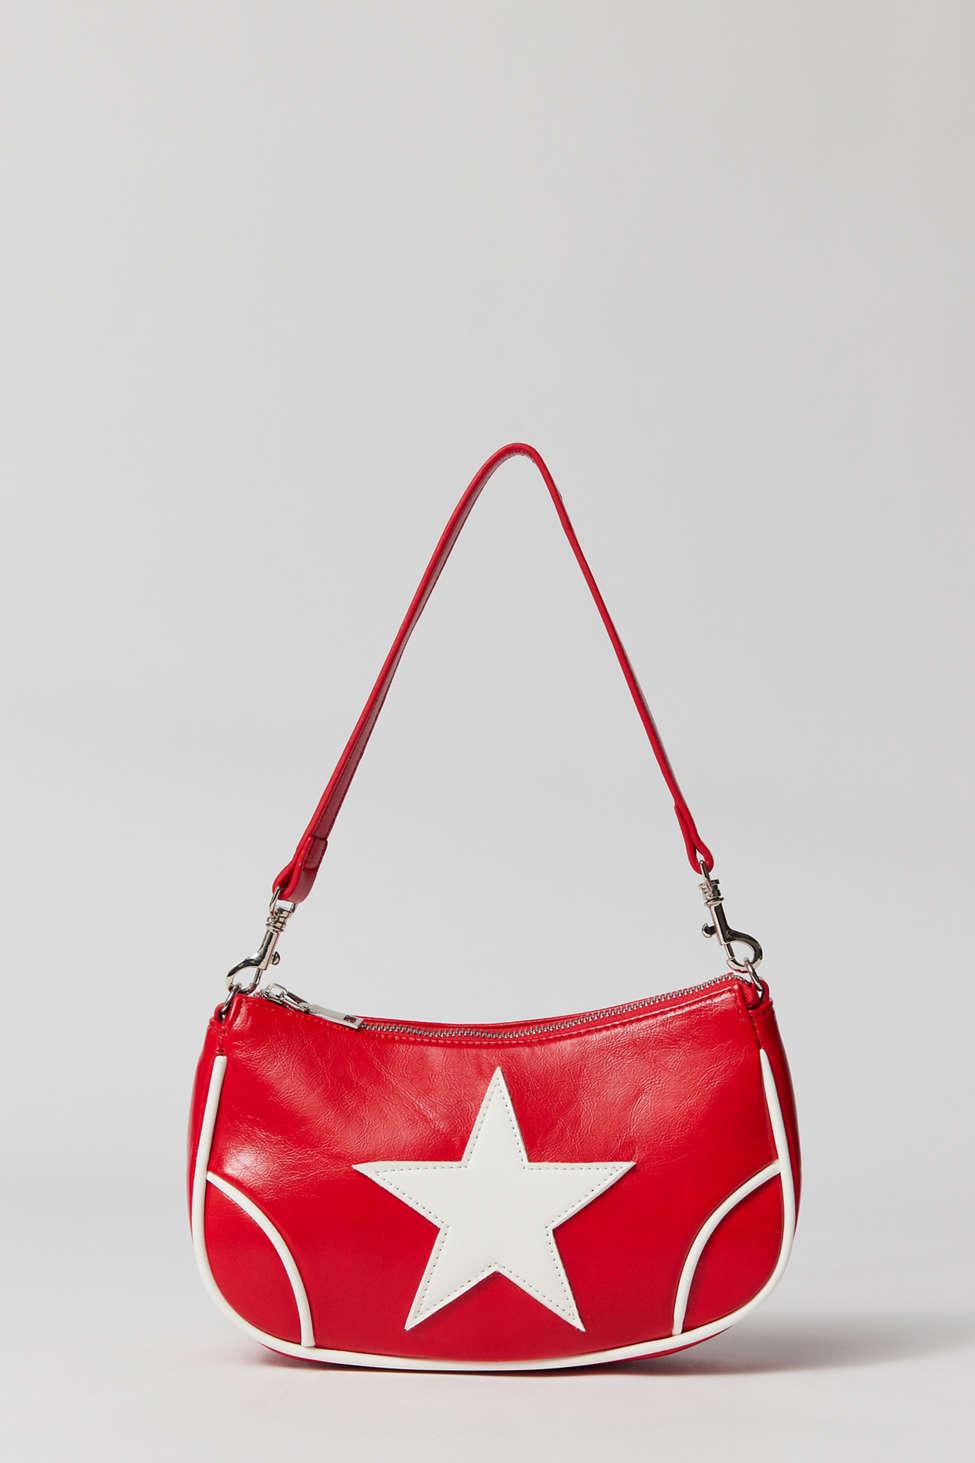 Urban Outfitters Daphne Moto Baguette Bag in Red